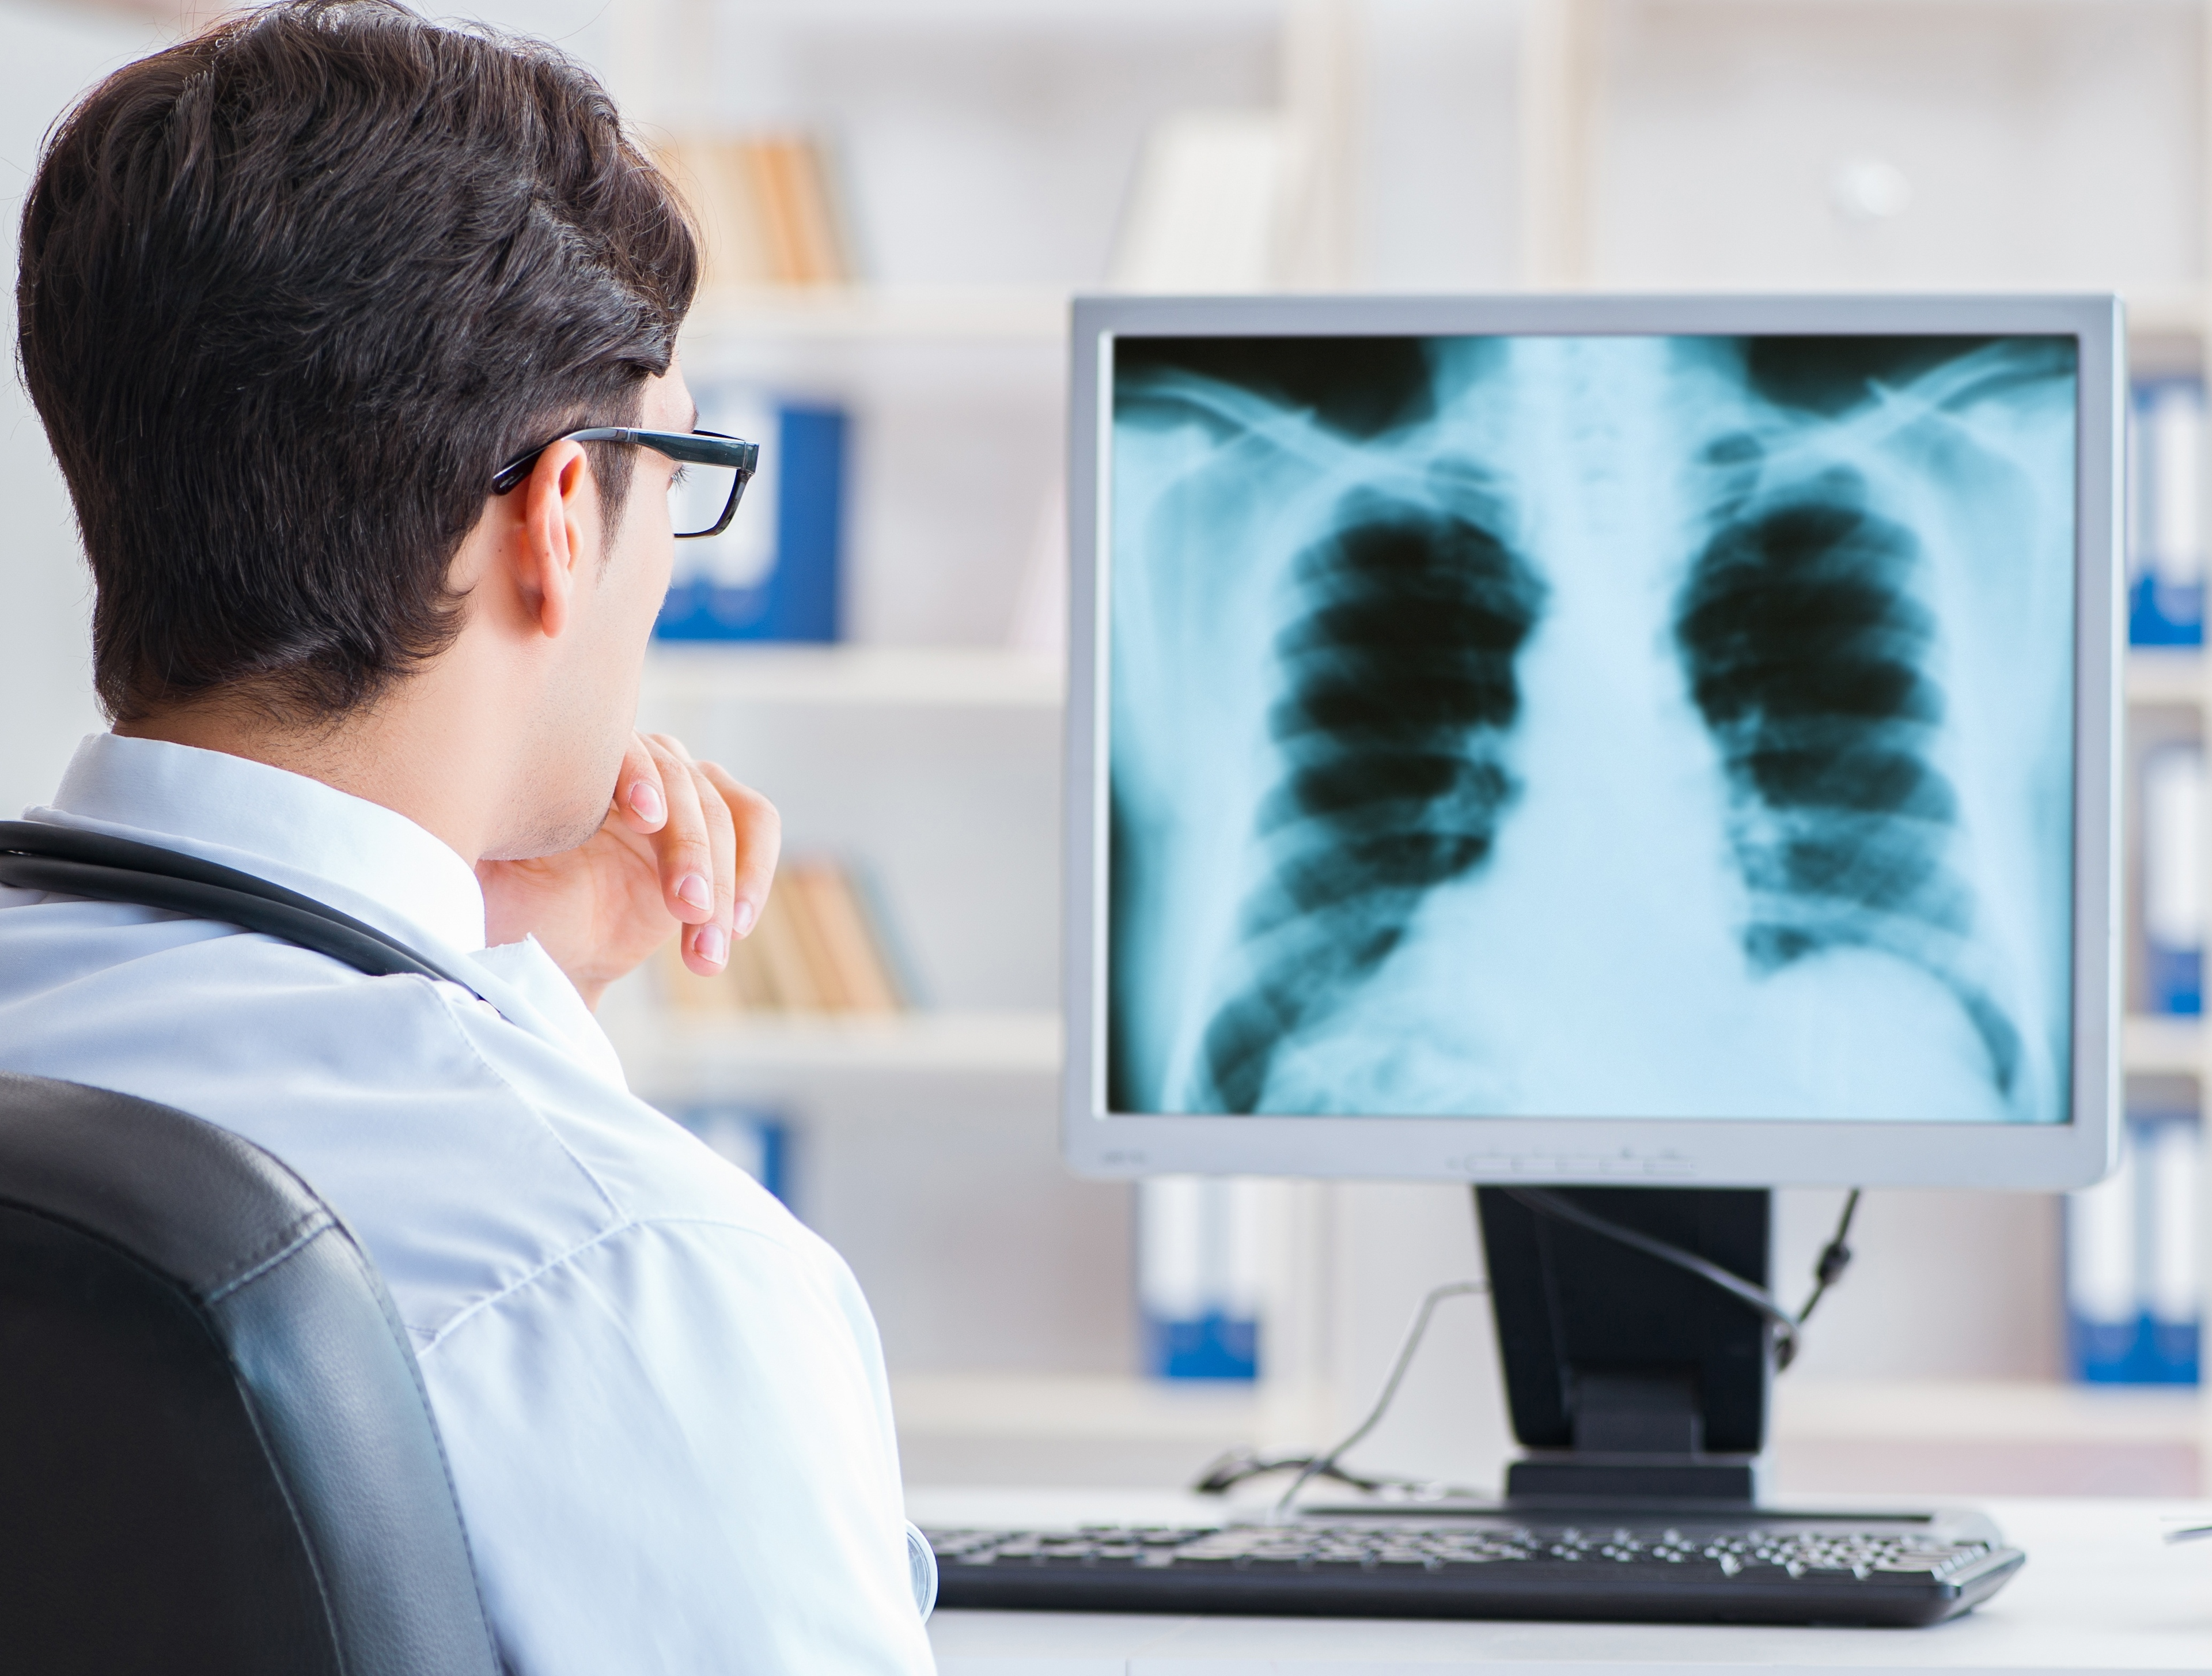 Reining in the Boilerplate Info on Radiology Reports